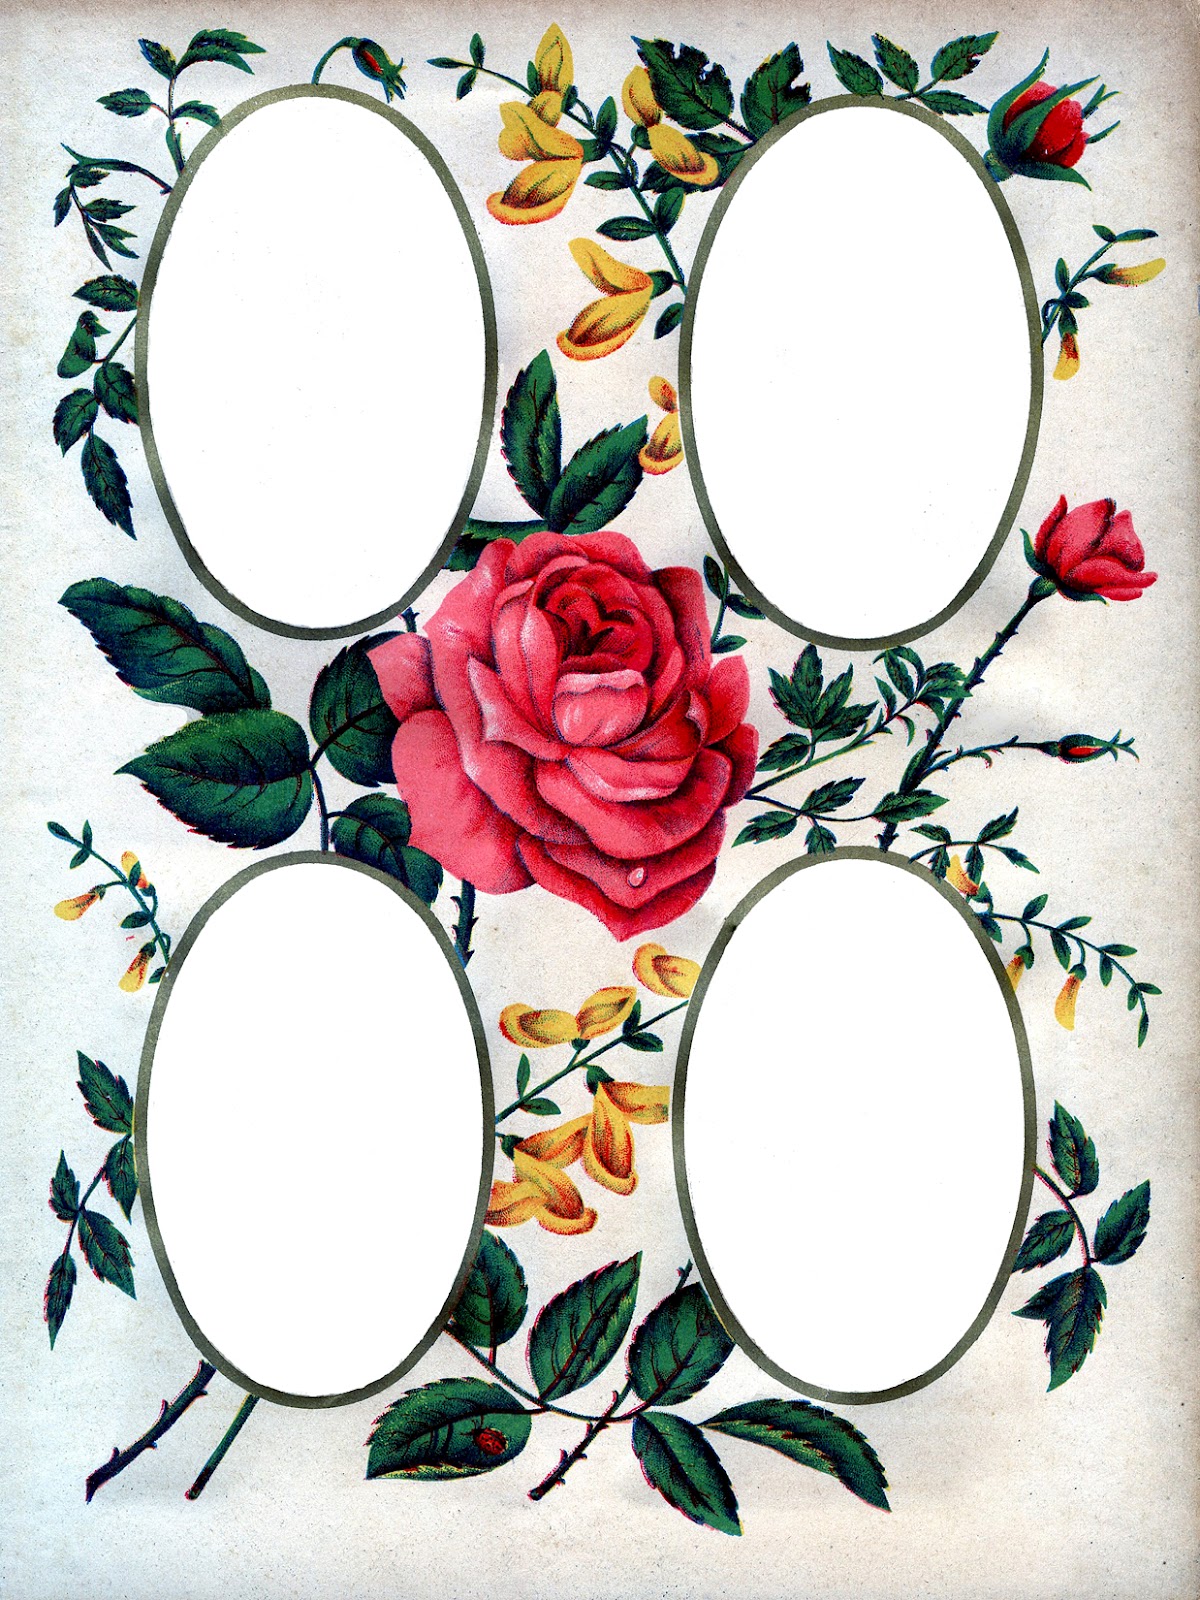 Victorian Album Page Printable - Roses - The Graphics Fairy1200 x 1600